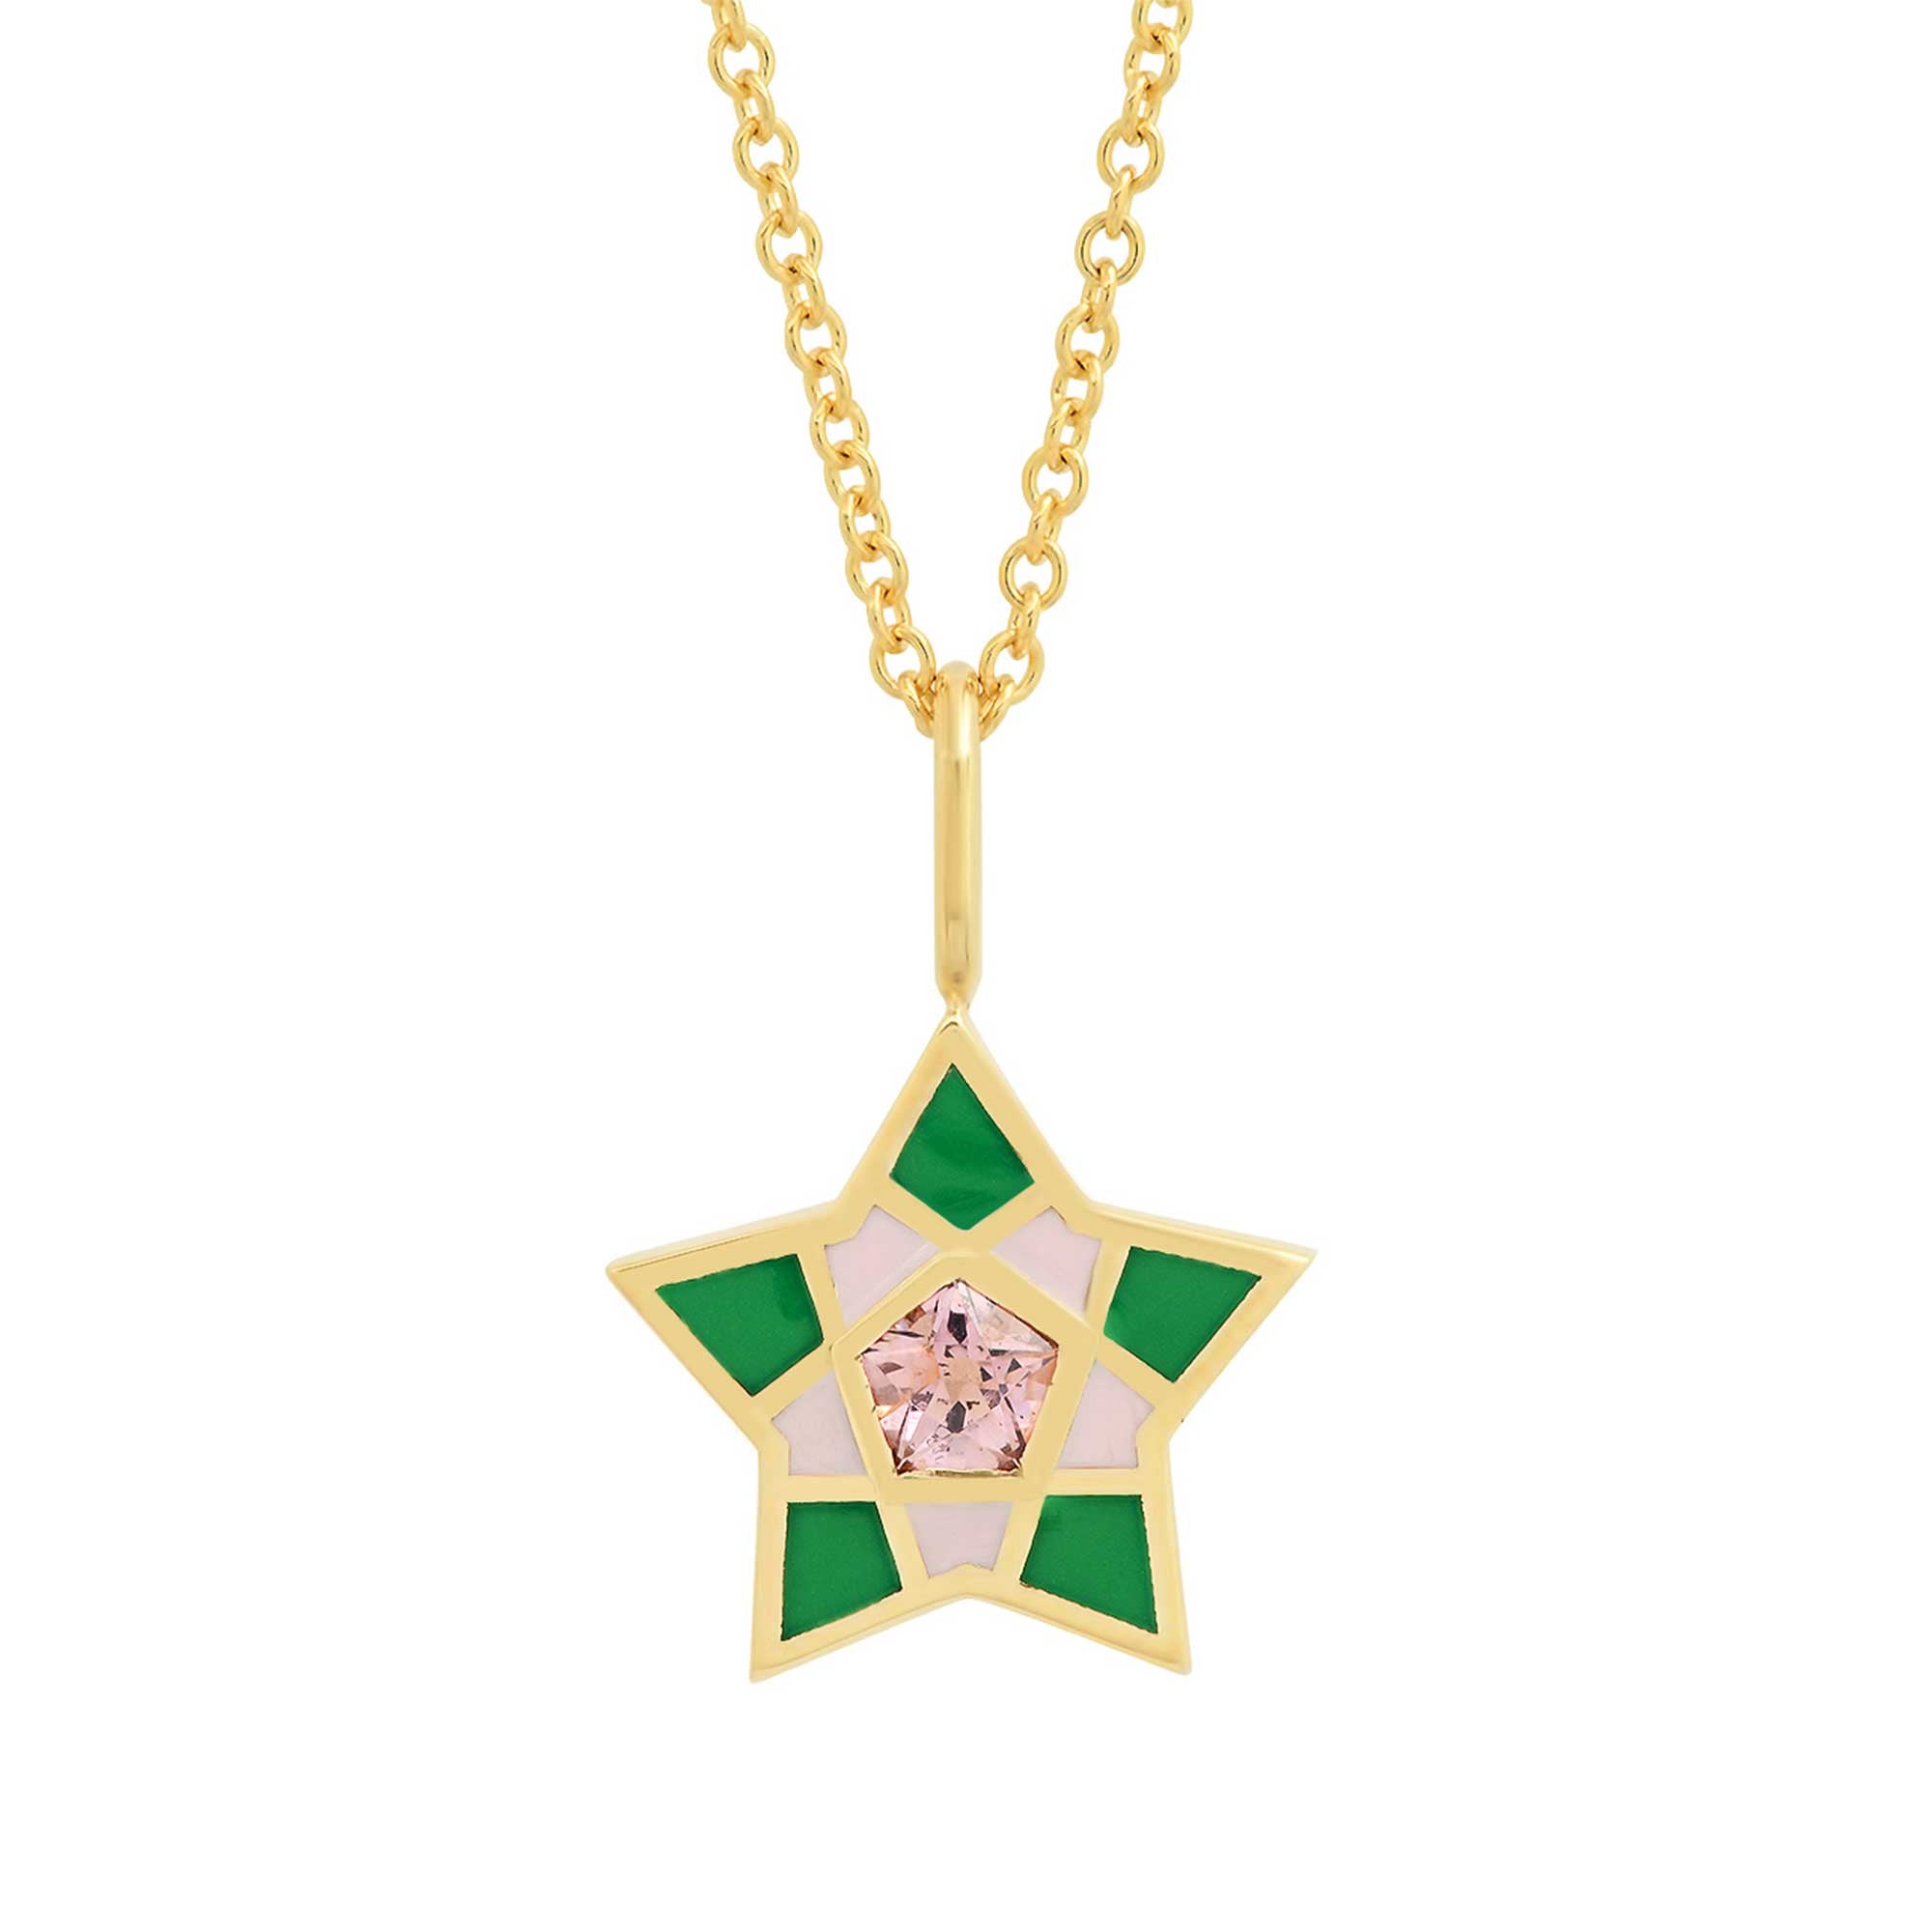 Kerr Star Spinel Necklace